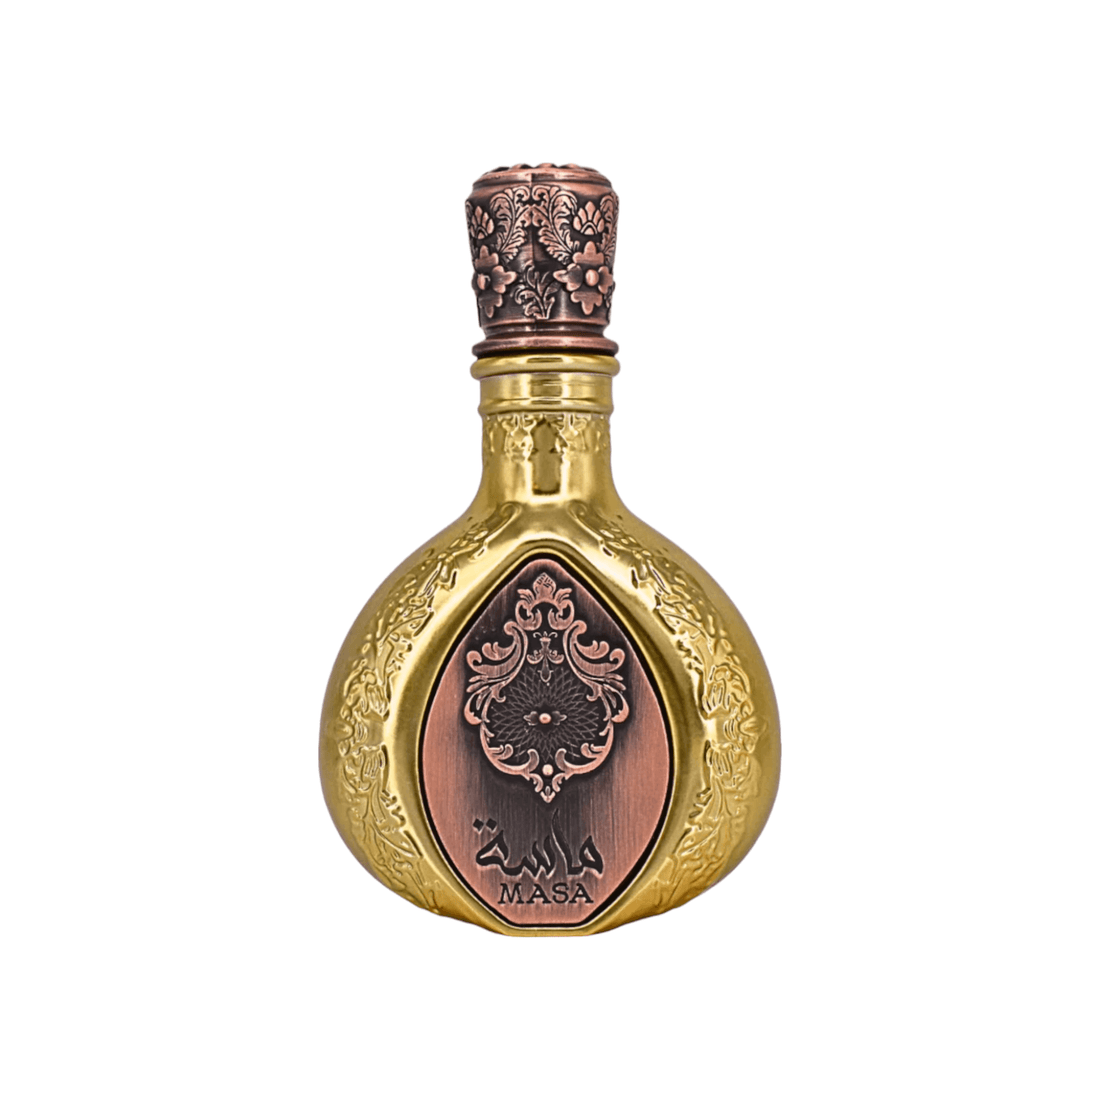 Luxurious 100ml bottle of Masa Perfume by Lattafa Pride, encapsulating its blend of sophisticated and exotic notes.